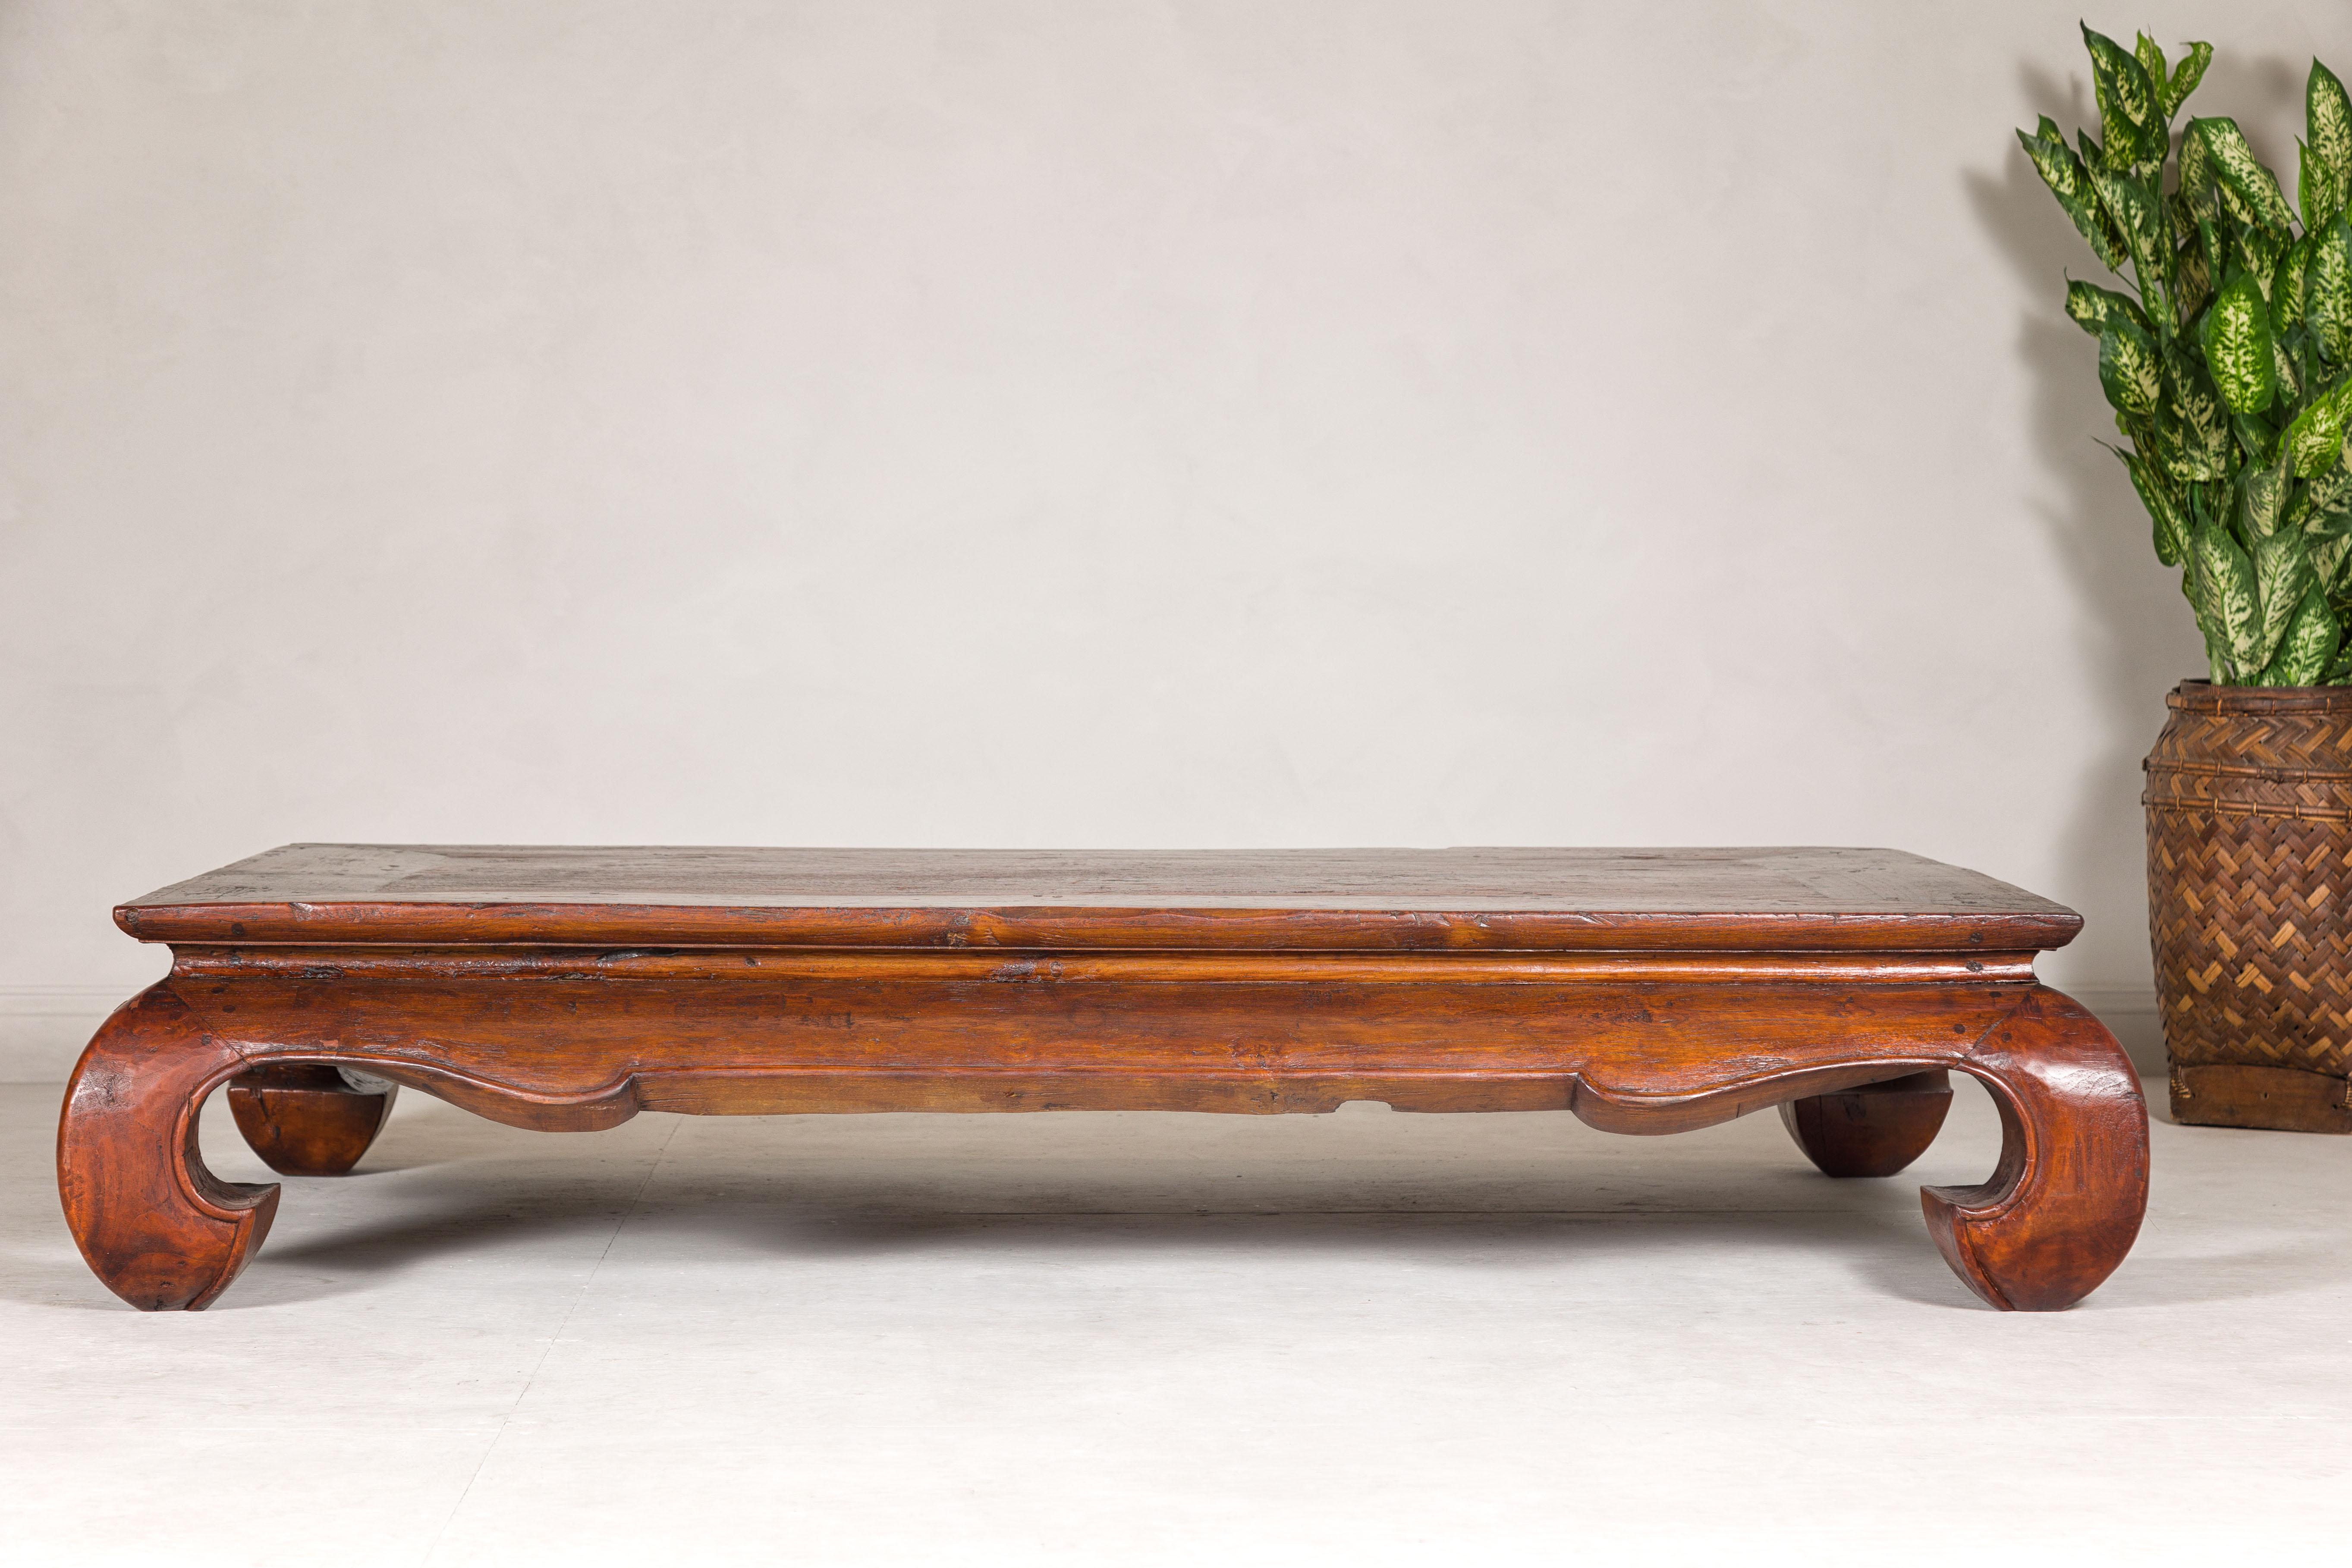 Qing Dynasty 19th Century Chow Leg Kang Table with Weathered Rustic Patina For Sale 9